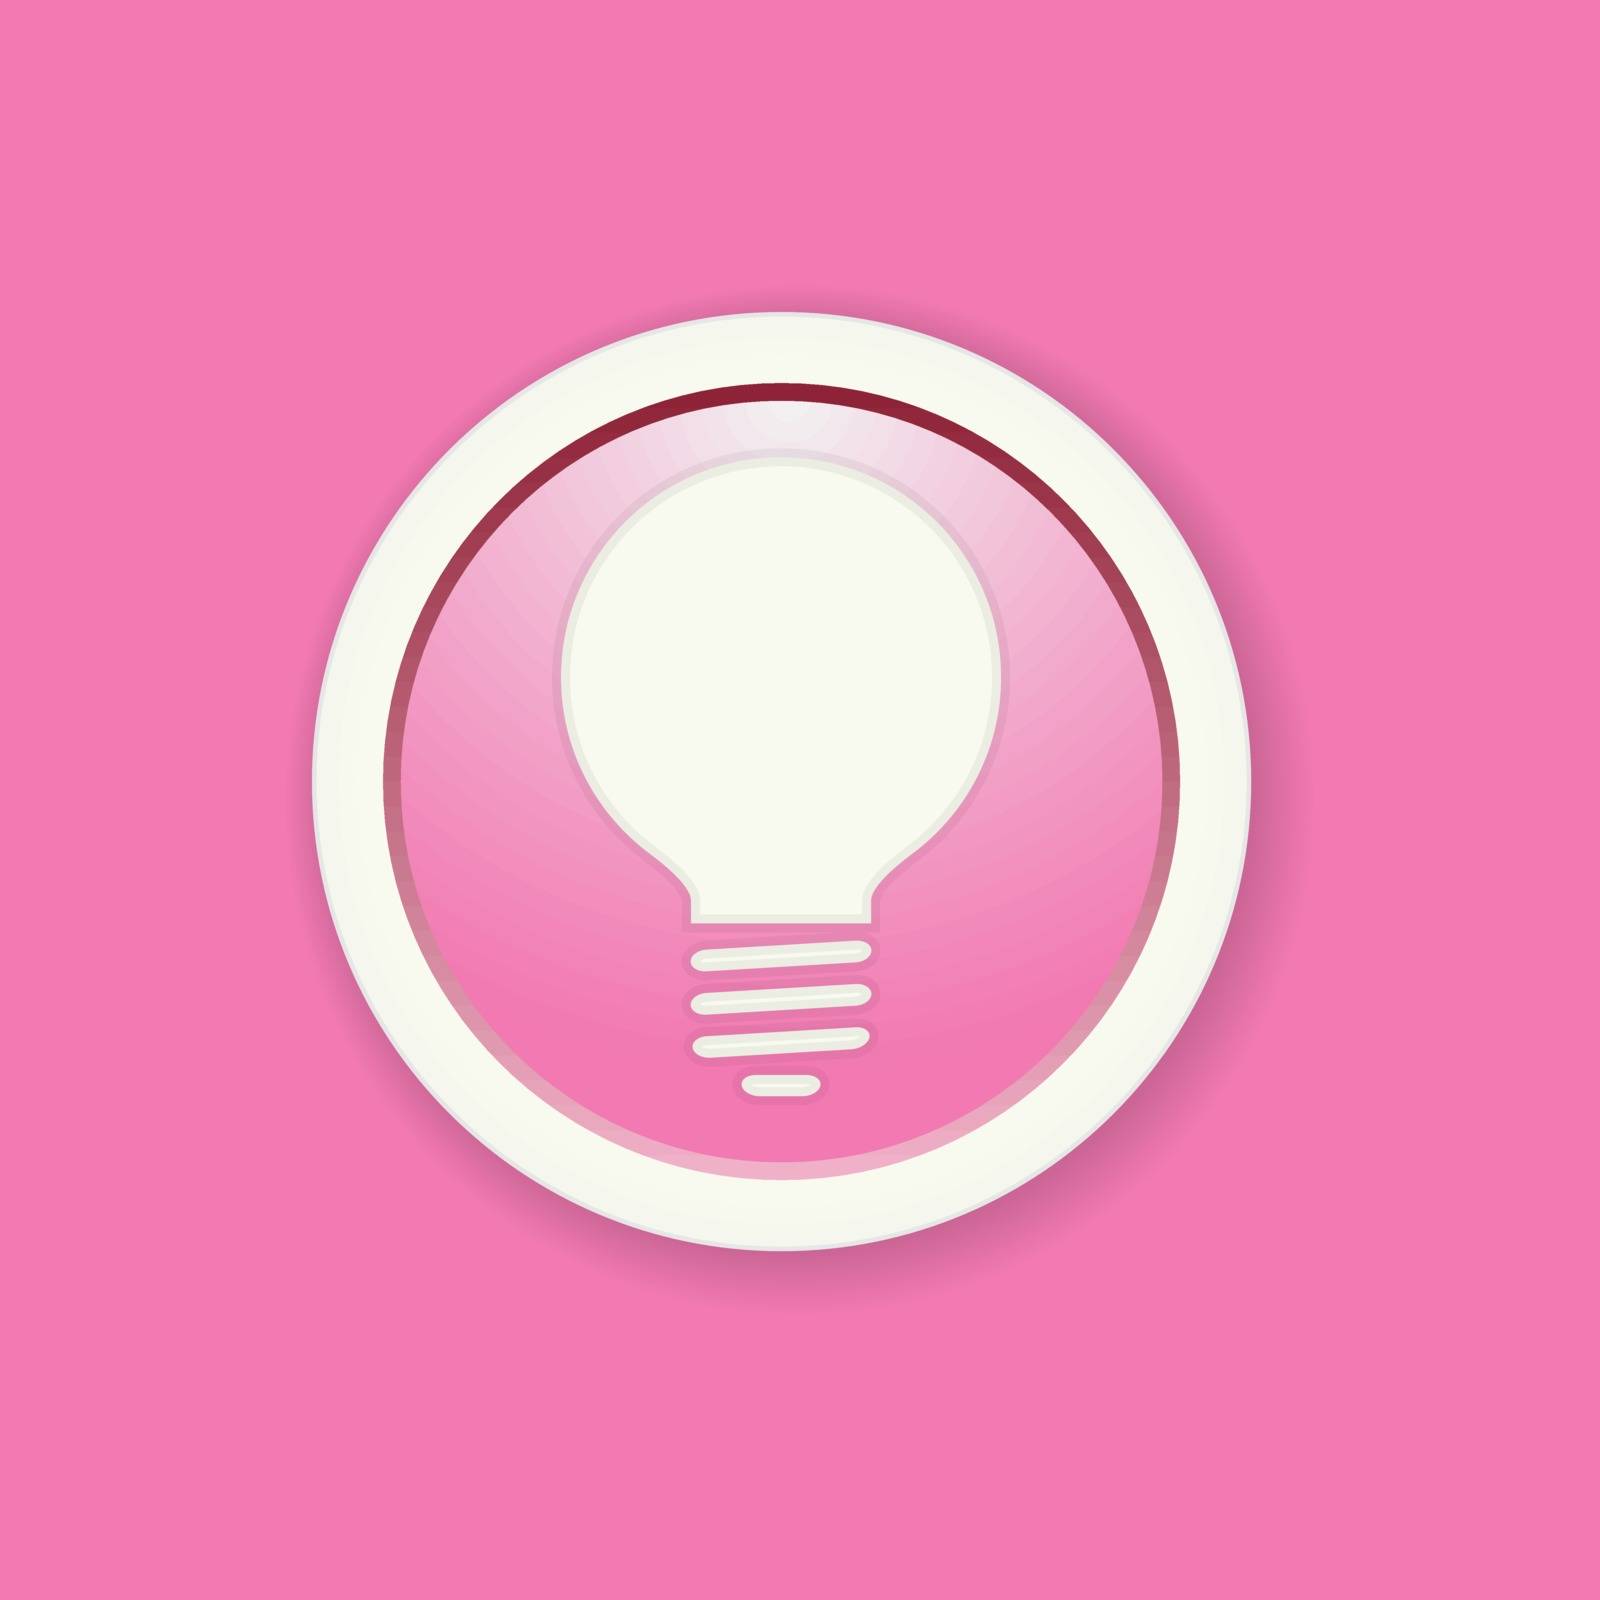 the pink glossy circle button with bulb pictogram by madtom